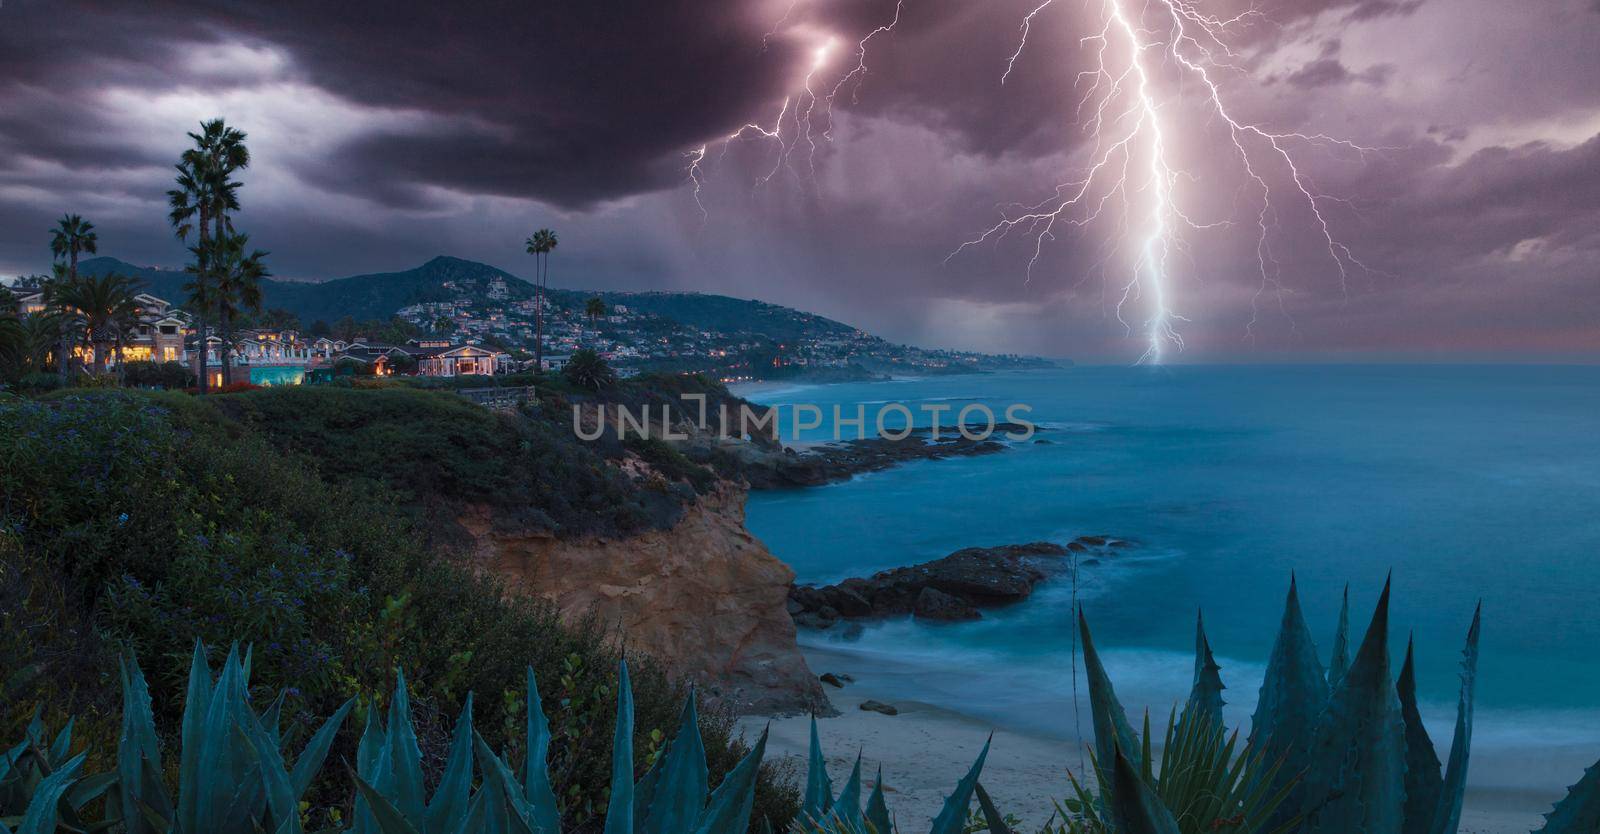 Lightning flashes over a cliff overlooking the ocean in Laguna Beach, by steffstarr